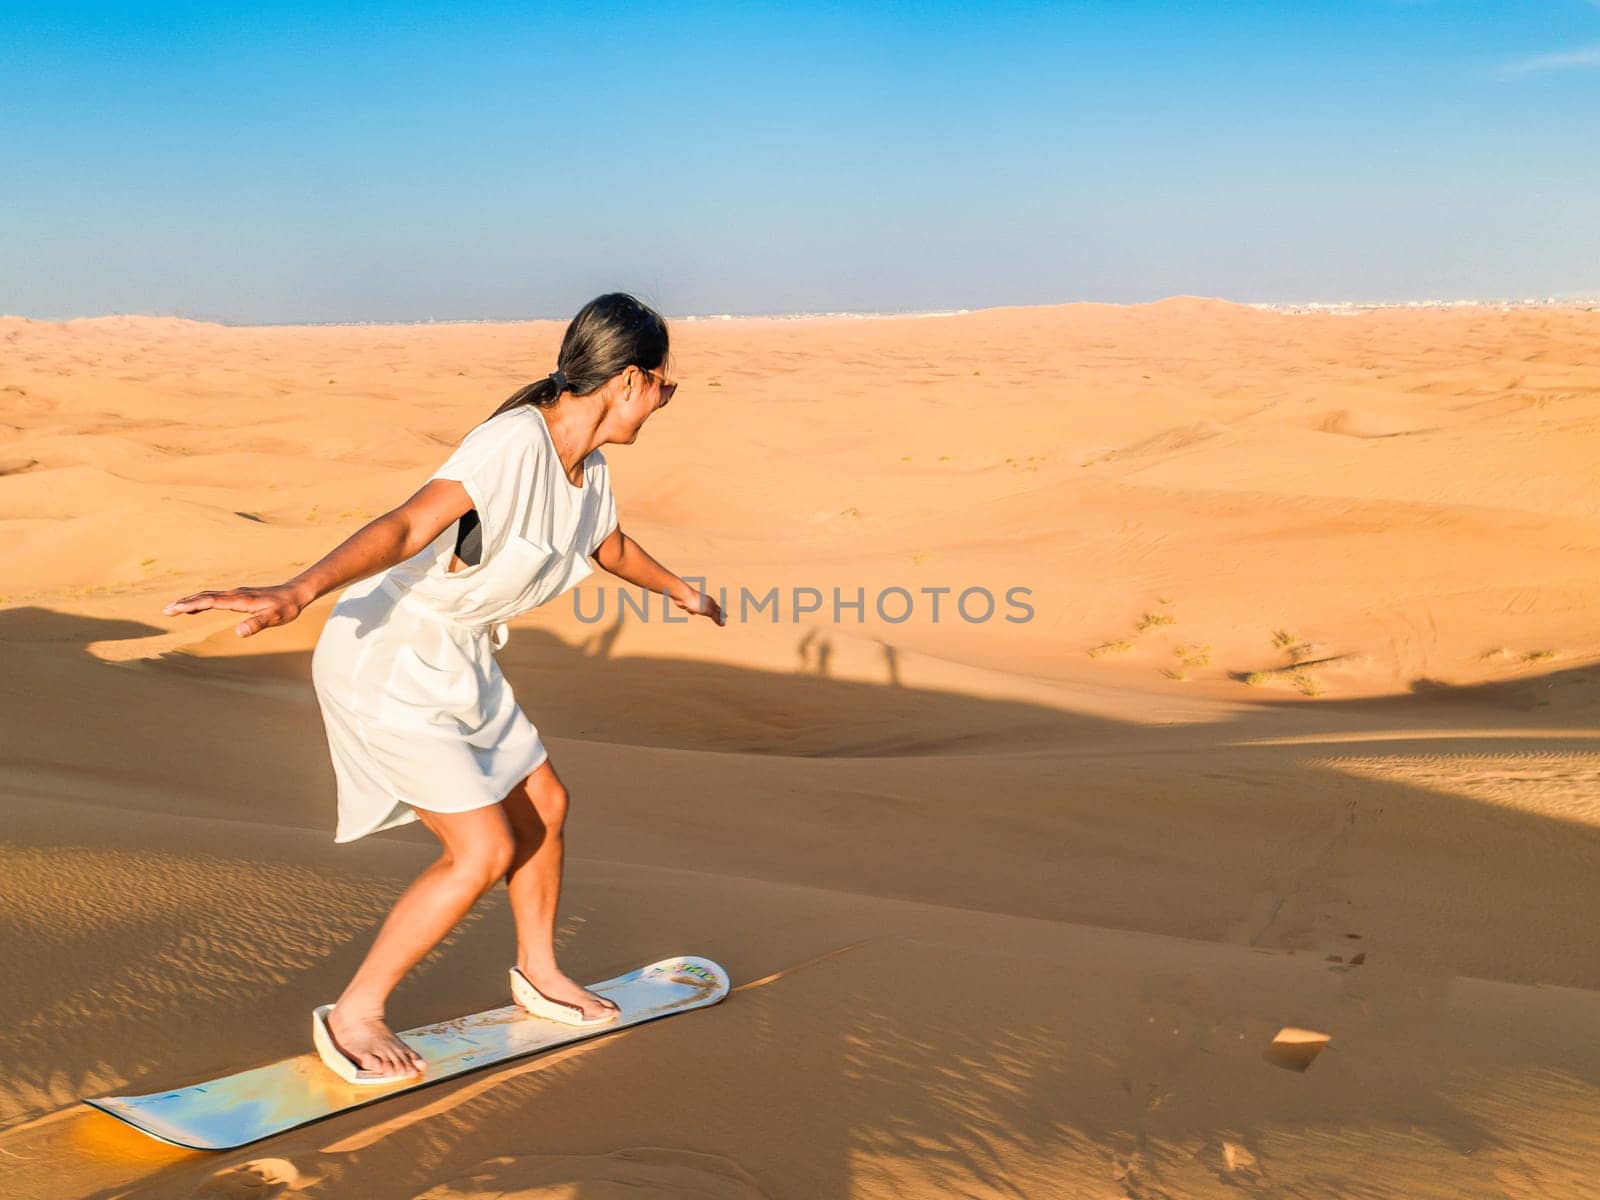 Young Asian women sand surfing at the sand dunes of Dubai United Arab Emirates, sand desert on a sunny day in Dubai.